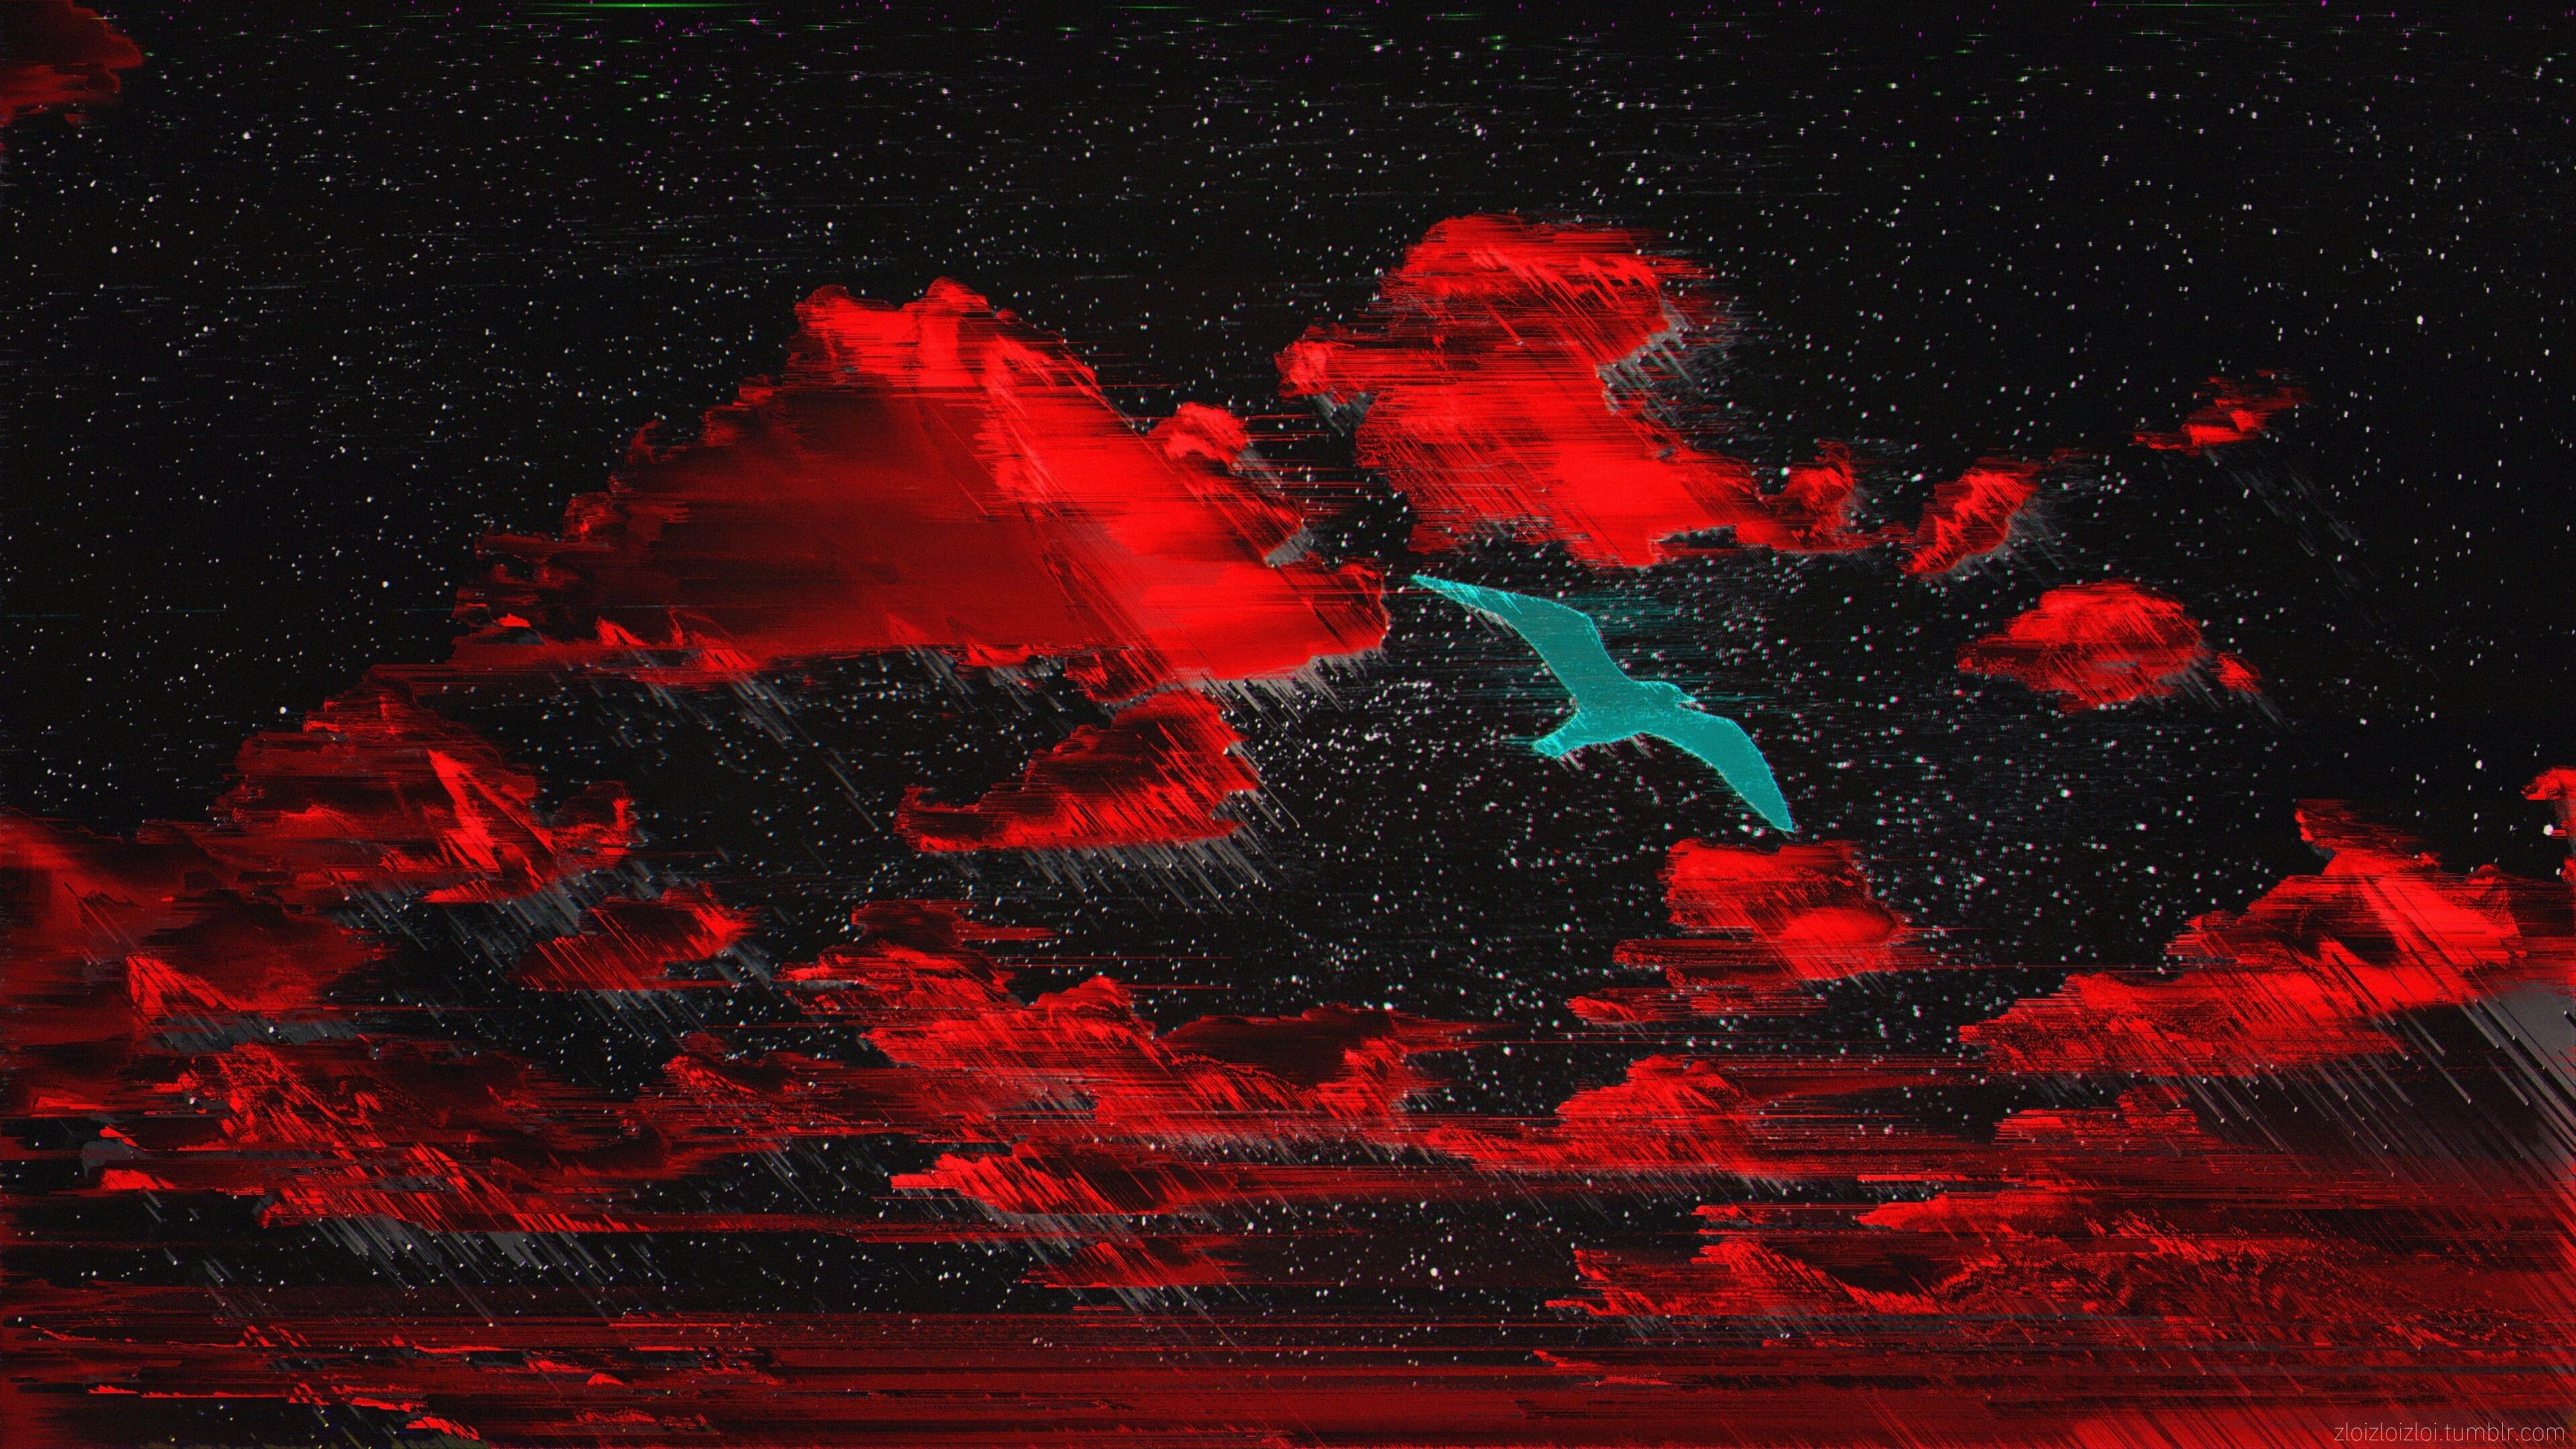 A digital painting of a bird flying through a red and black sky - Glitch